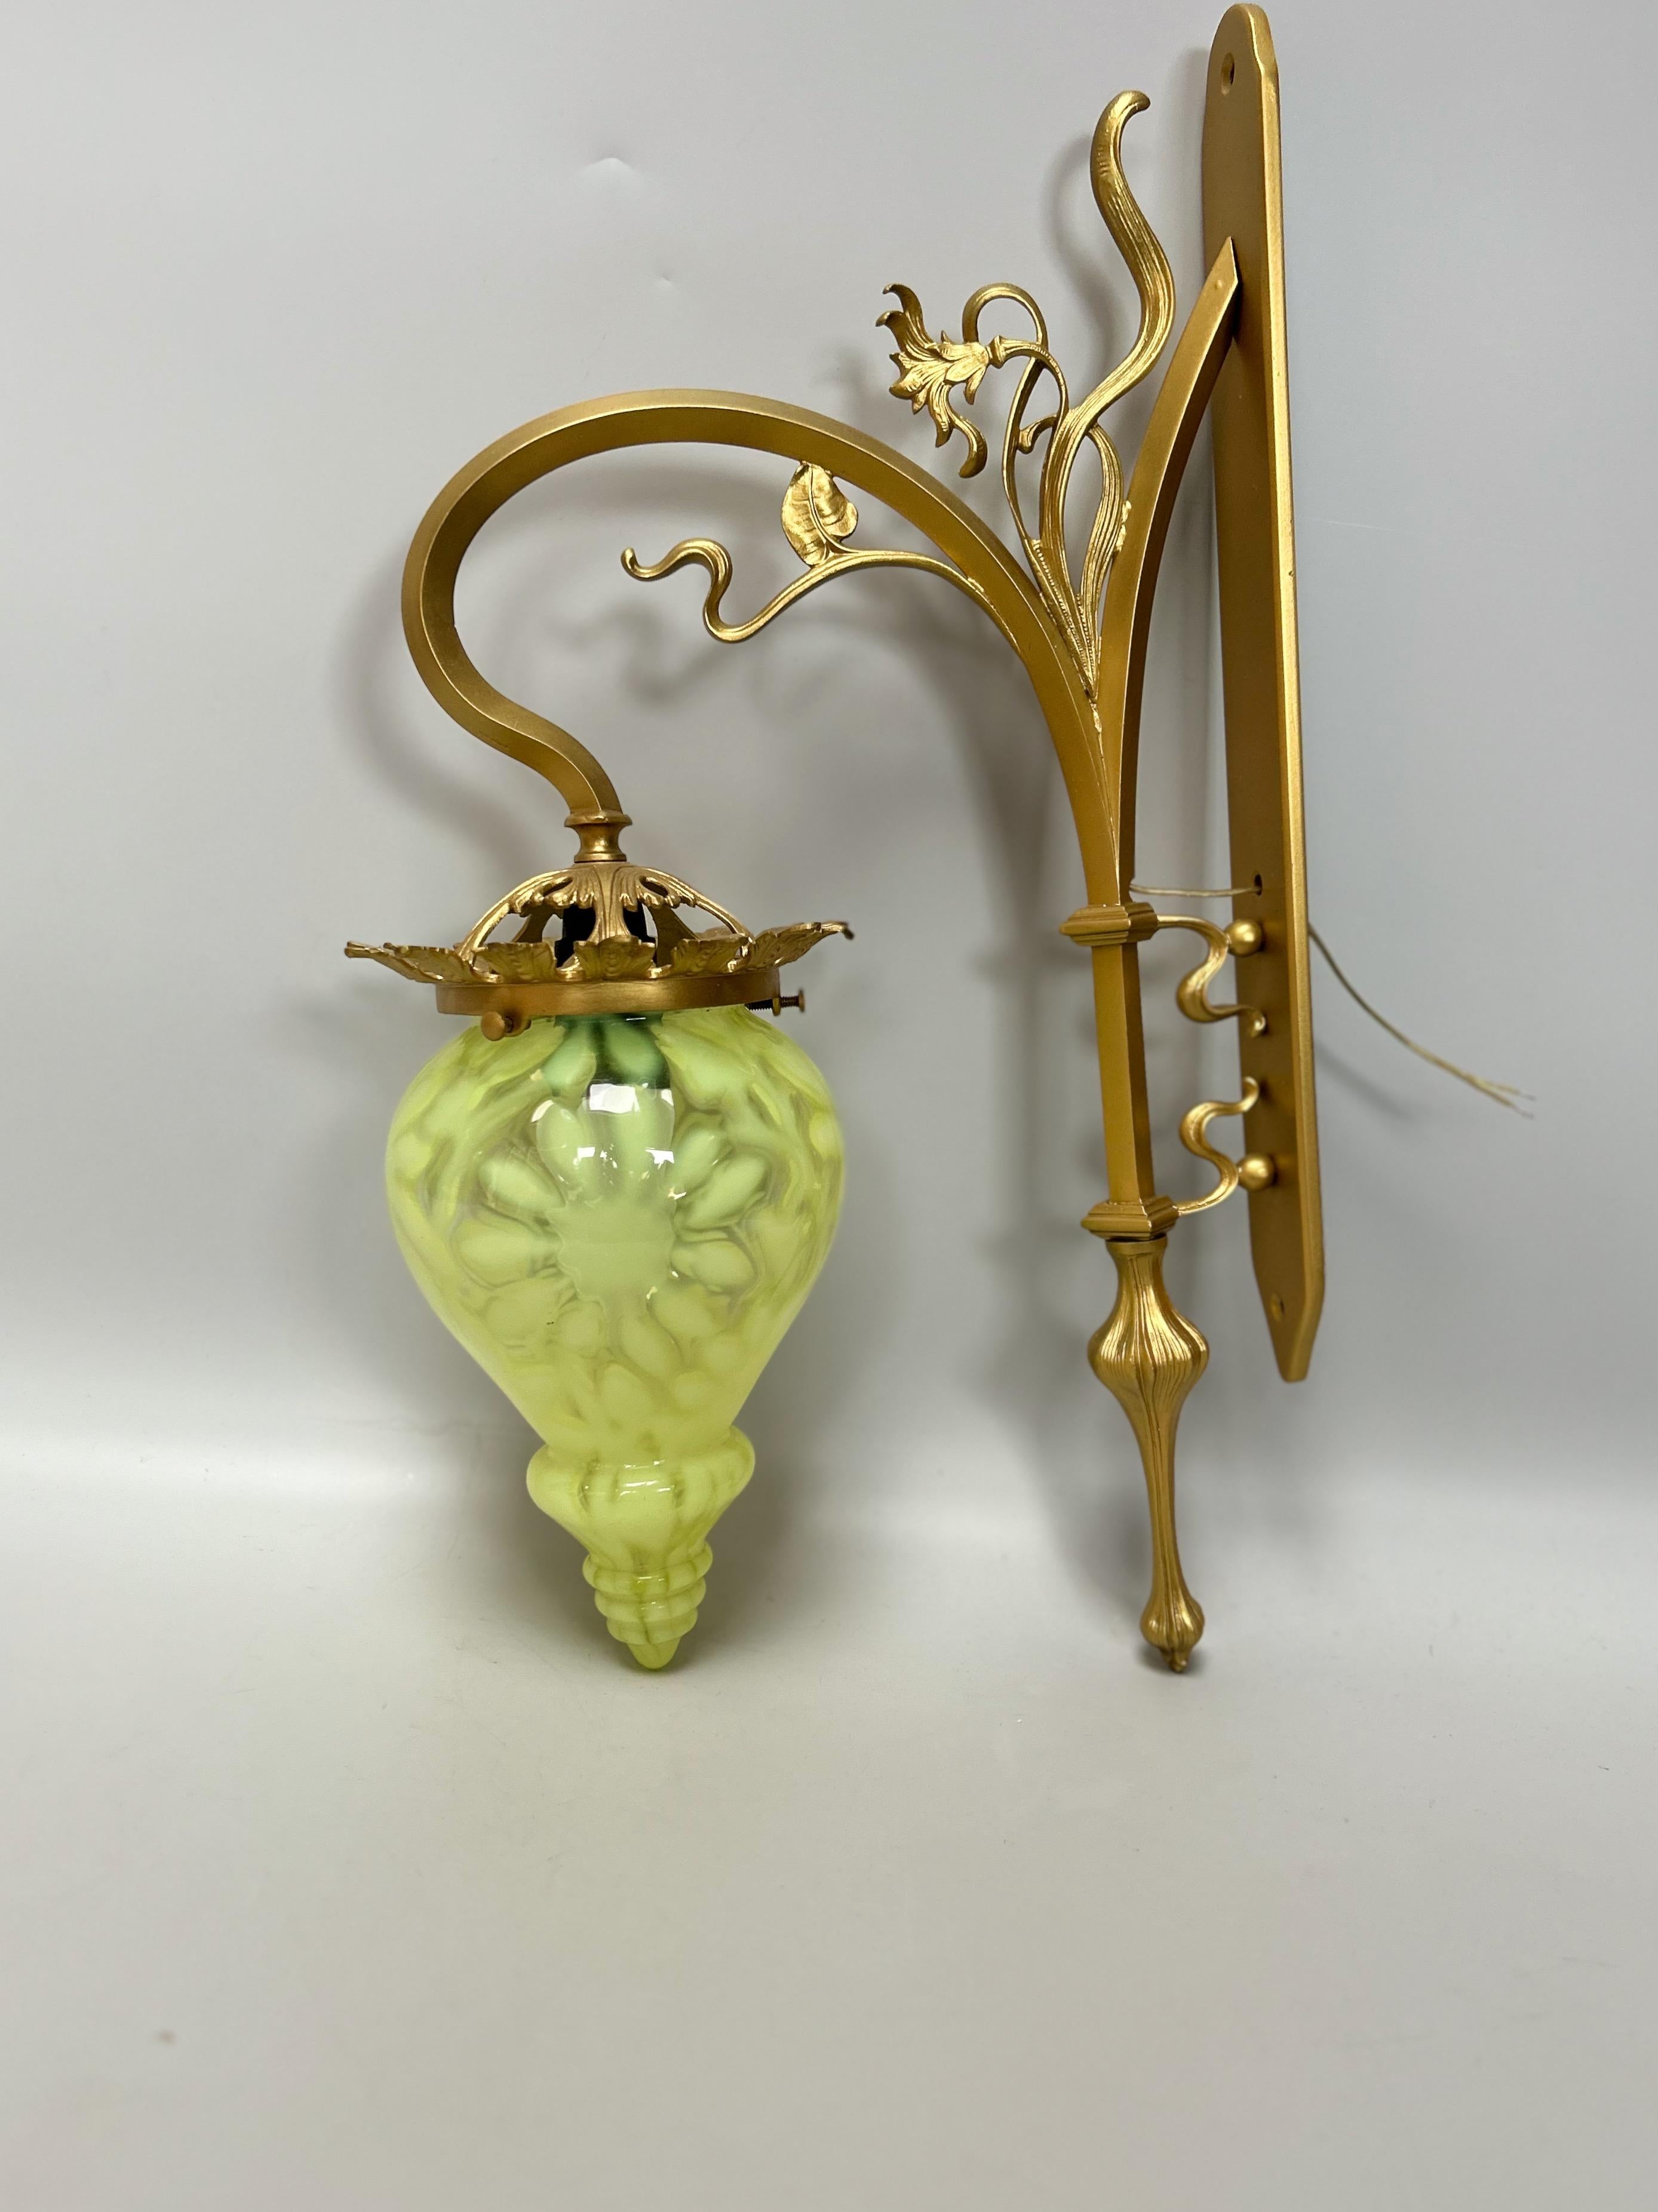 Large pair of art nouveau sconces circa 1900.
Gilt bronze mount with floral decoration.
Opalescent blown glass tulip globe.
In the taste of Majorette.
In perfect condition and electrified.

Total height: 45 cm
Width: 4 cm
Depth: 26 cm
Weight: 5 Kg